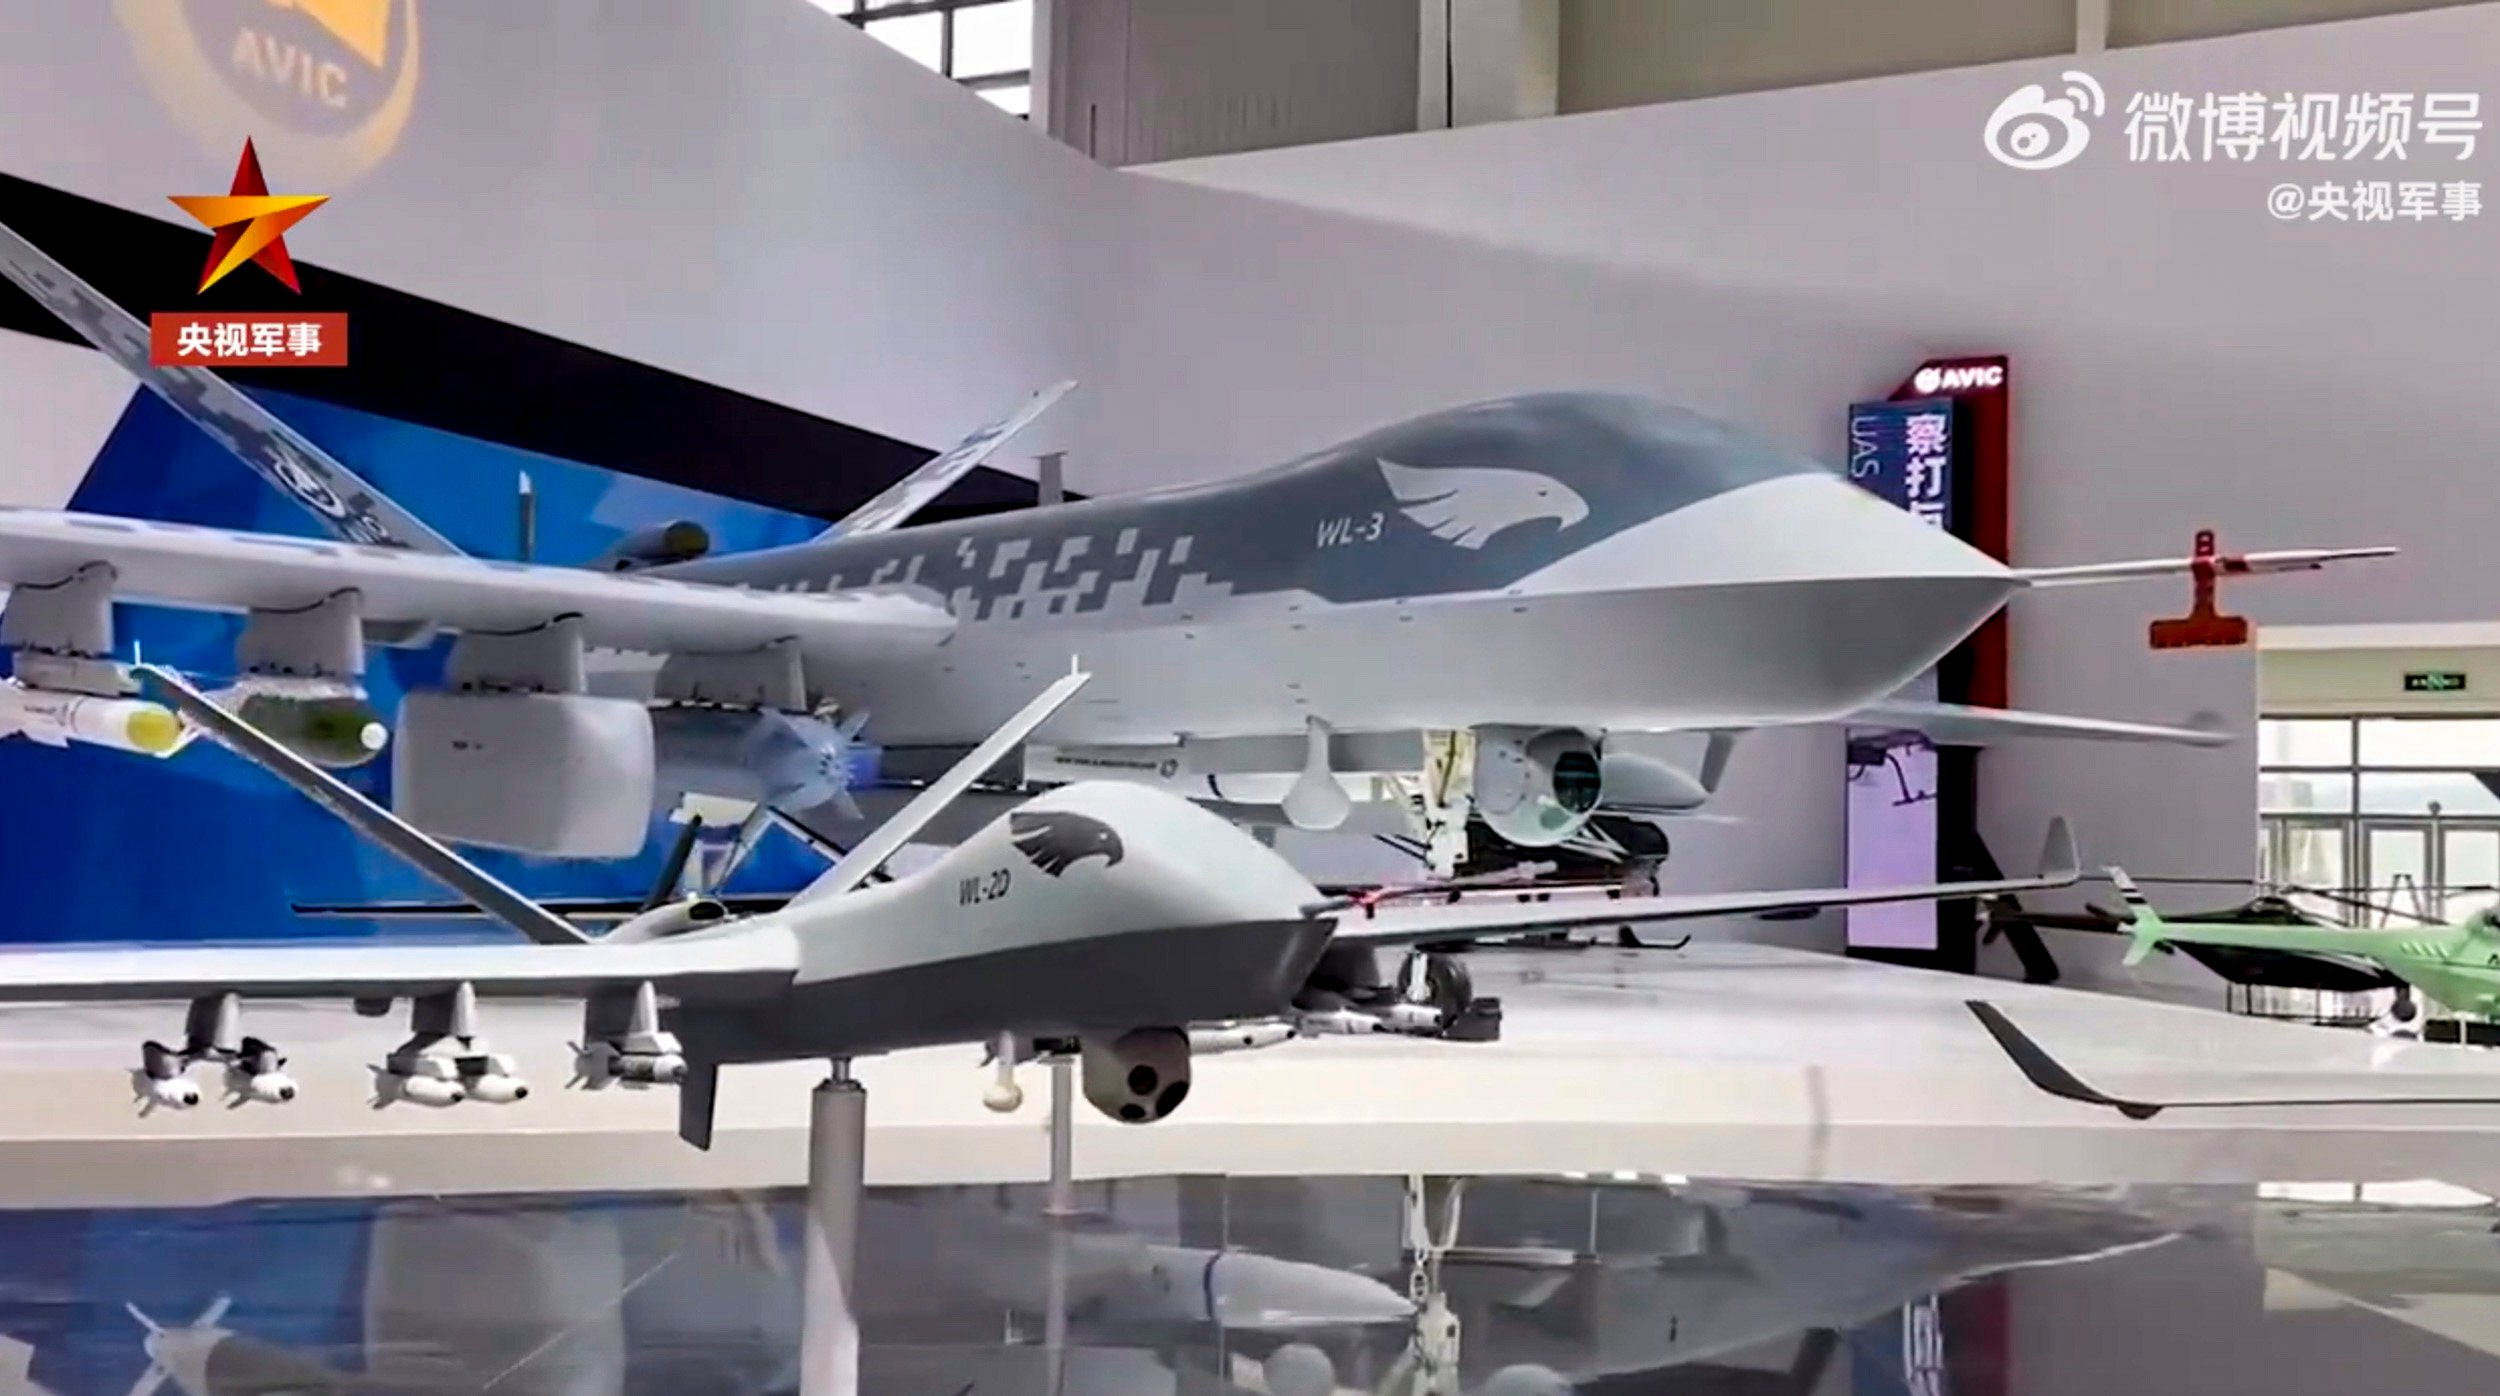 China unveils Wing Loong-3 intercontinental military drone with self-defence mechanism at Zhuhai air | China Morning Post